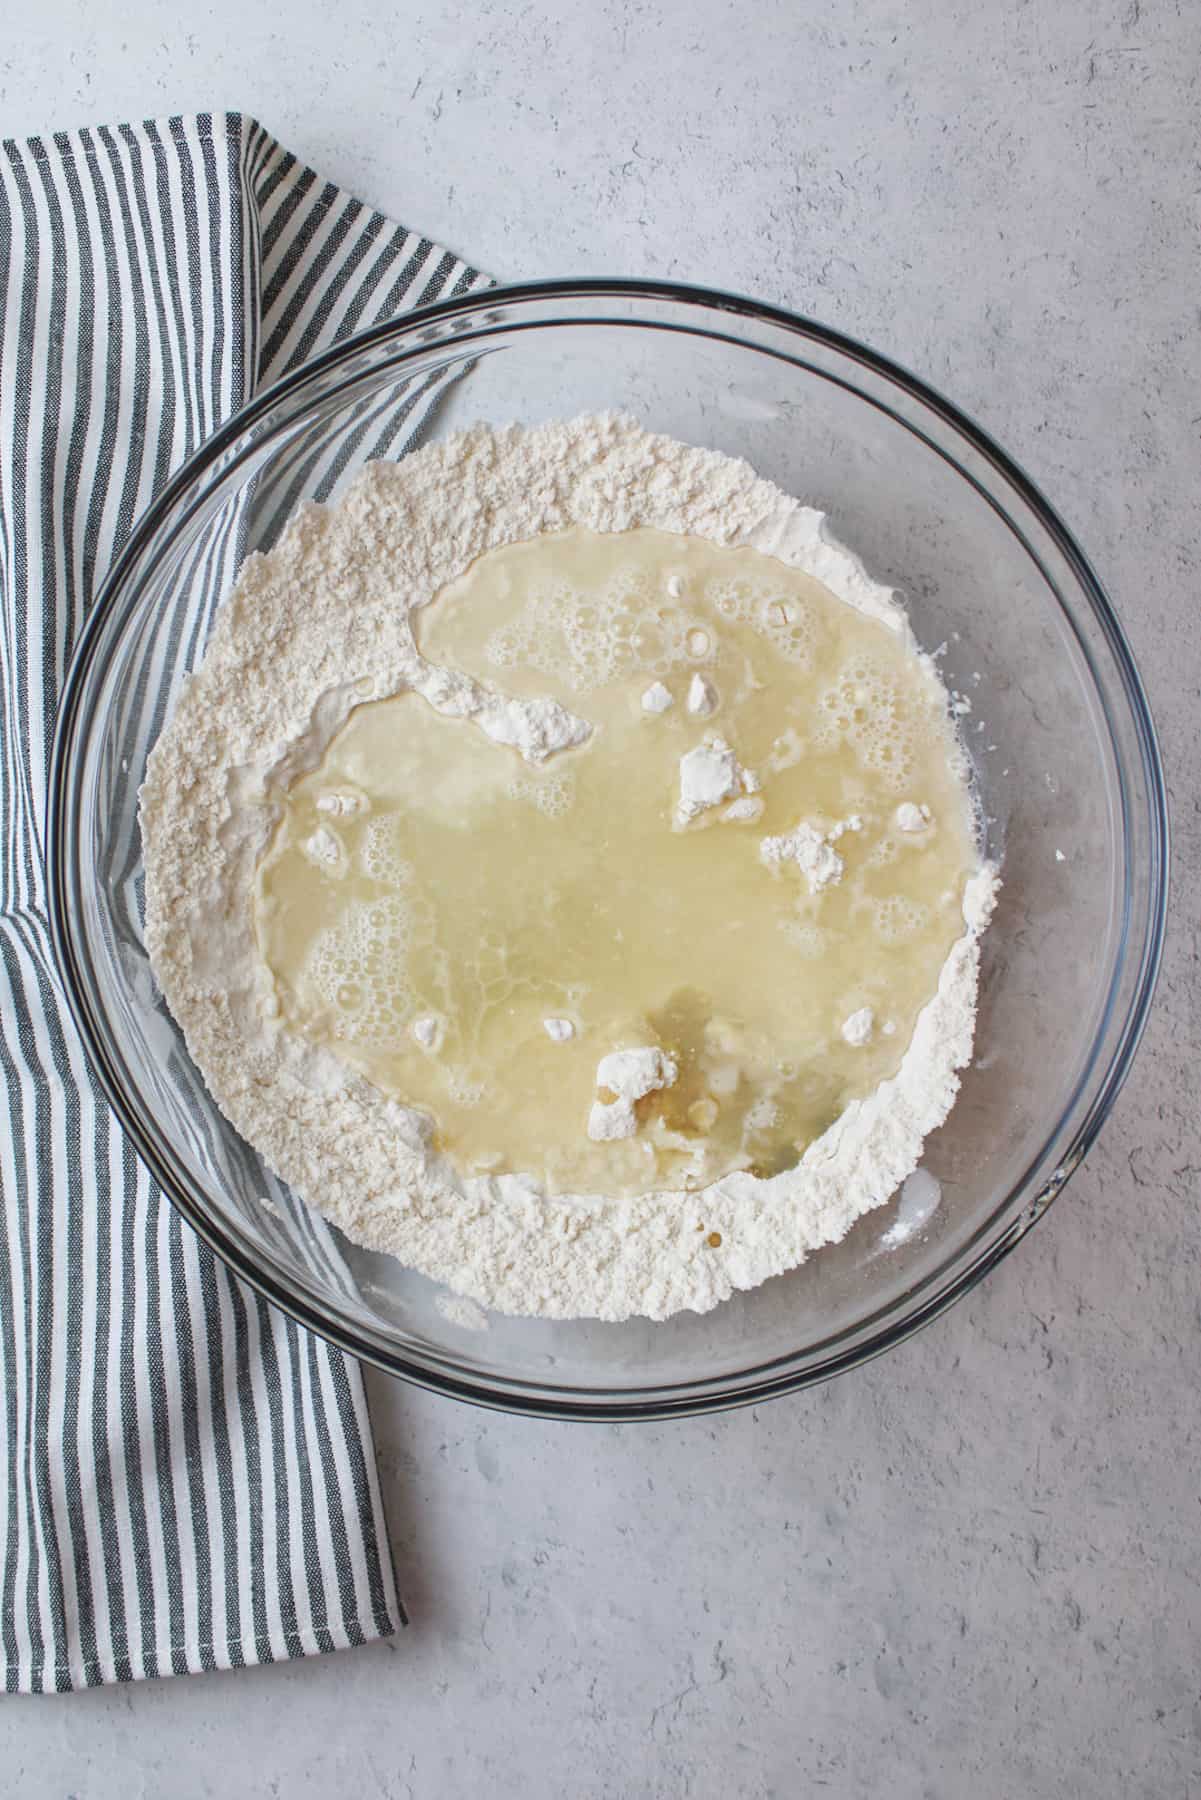 warm water added to dry yeast flour mixture in mixing bowl